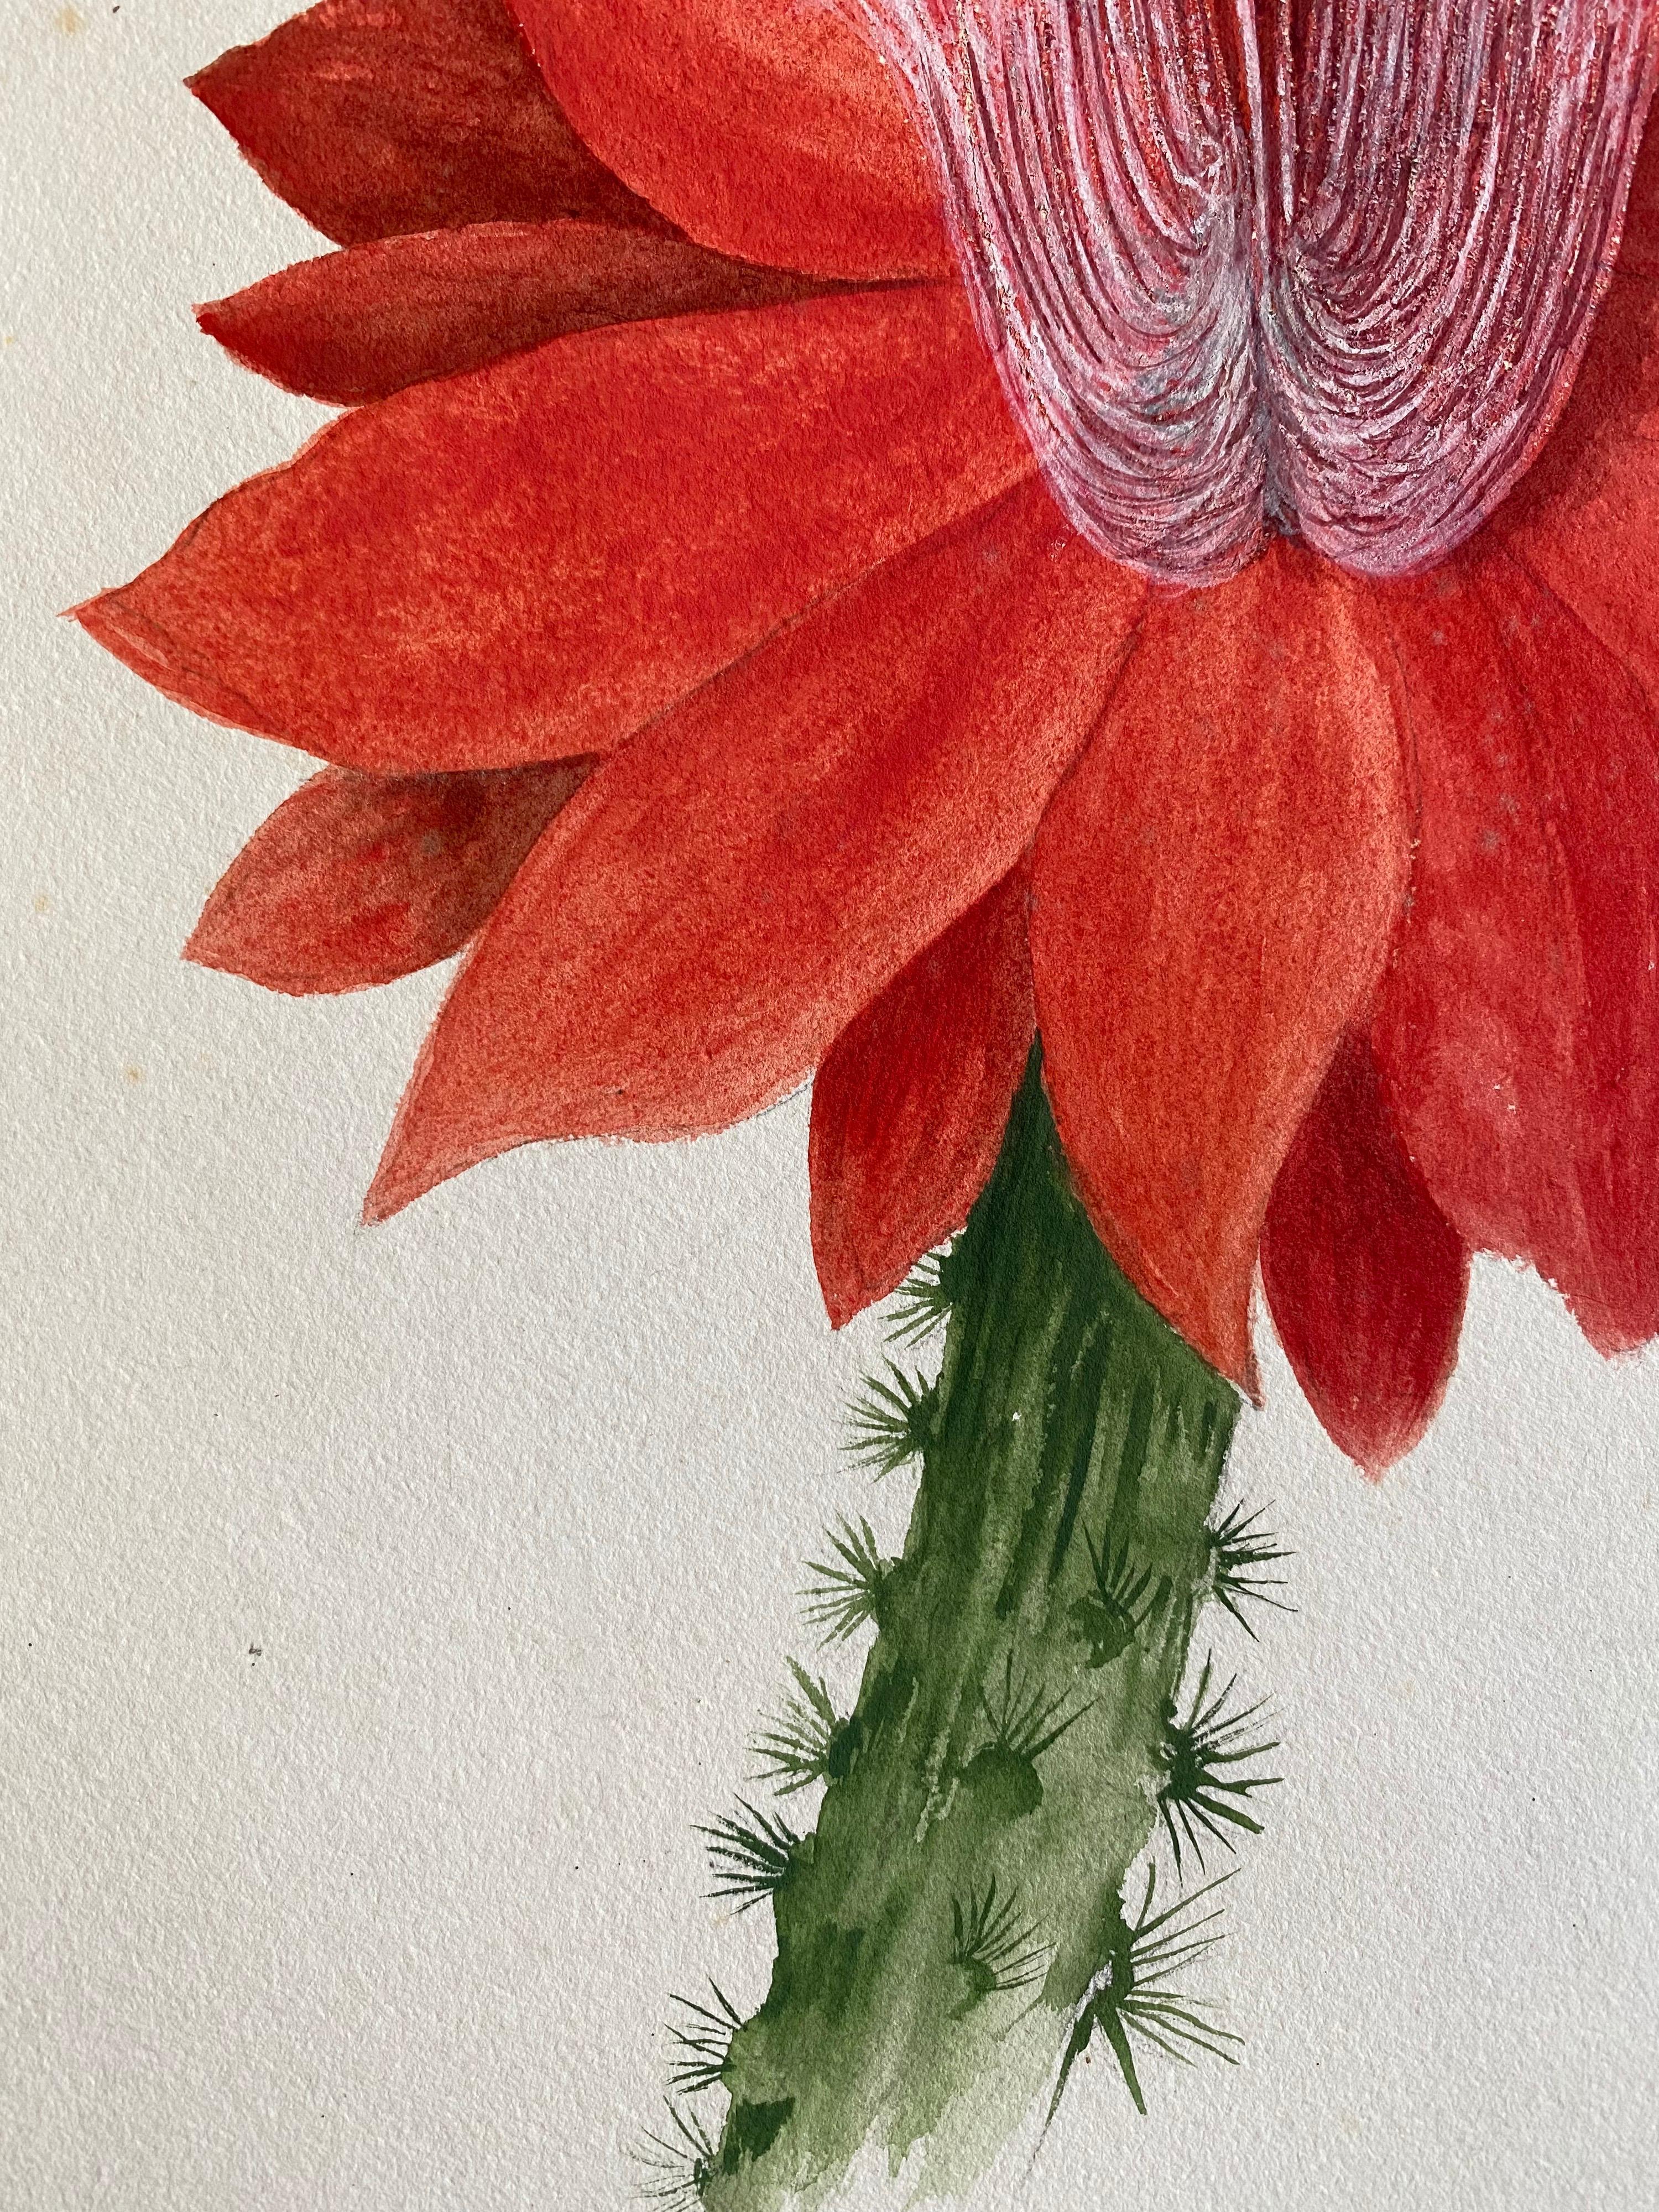 Fine Antique British Botannical Watercolour Painting, circa 1900's Red Flower In Good Condition For Sale In Cirencester, GB